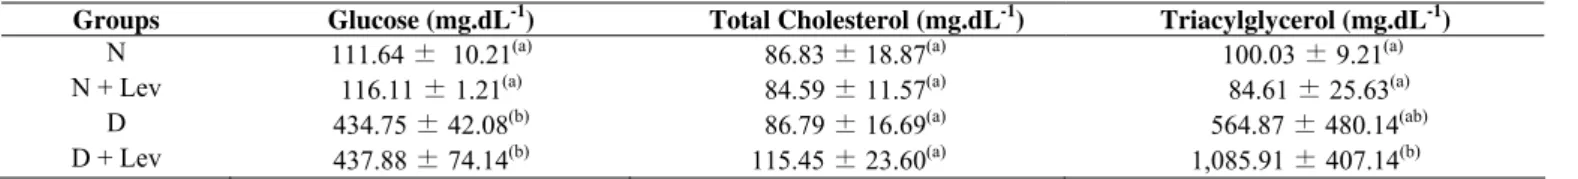 Table 1. Plasma concentration of glucose, total cholesterol and triglycerides in normal (N), normal + levan (N+Lev), diabetic  (D) and diabetic + levan (D+Lev) rats after fifteen days of treatment